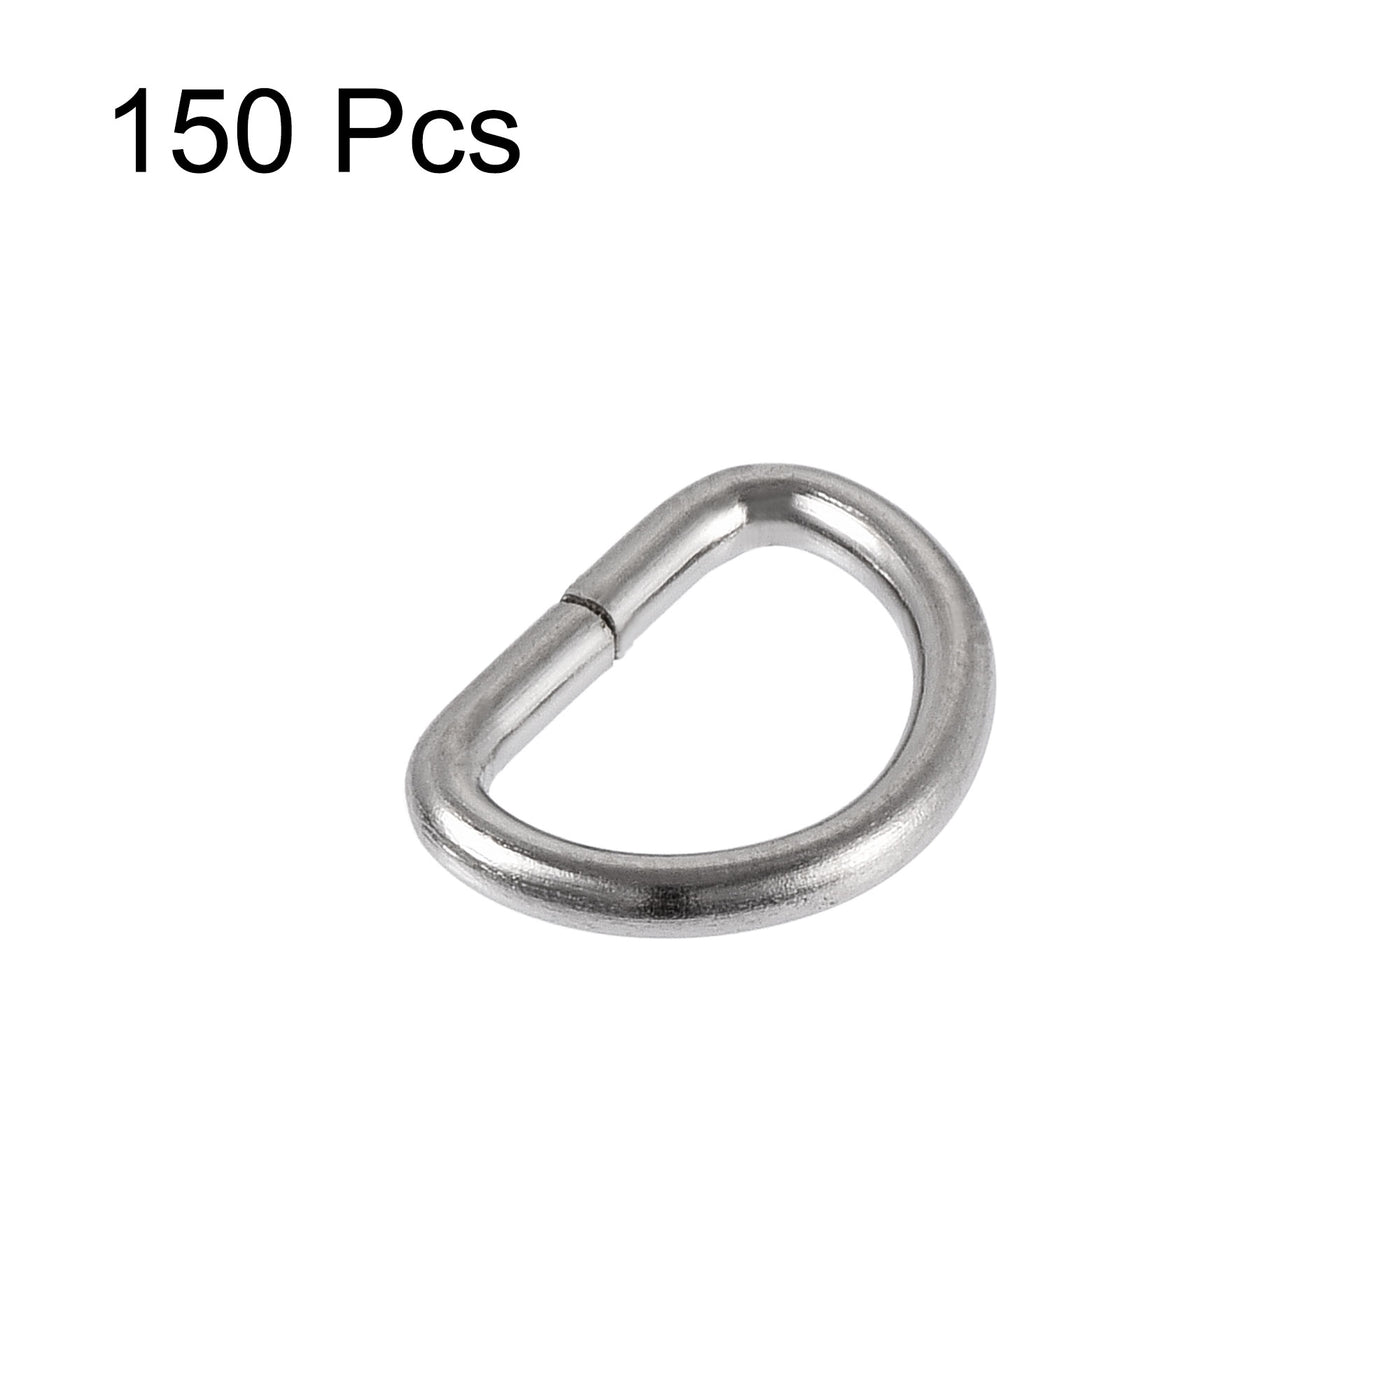 uxcell Uxcell Metal D Ring 0.39"(10mm) D-Rings Buckle for Hardware Bags Belts Craft DIY Accessories Silver Tone 150pcs